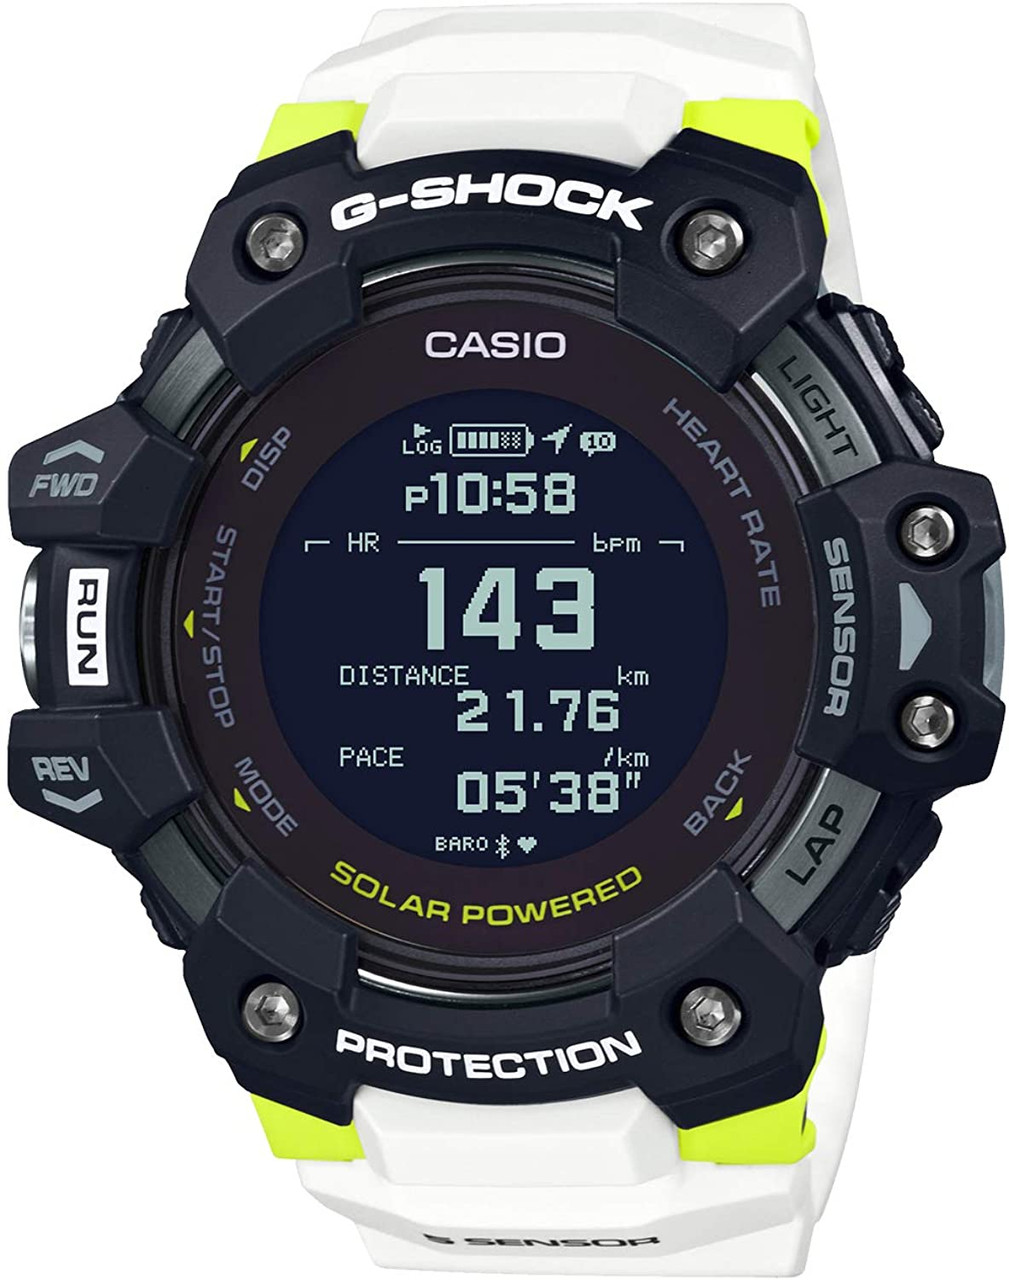 Casio G-SQUAD Heart Rate Monitor GBD-H1000-1A7JR
